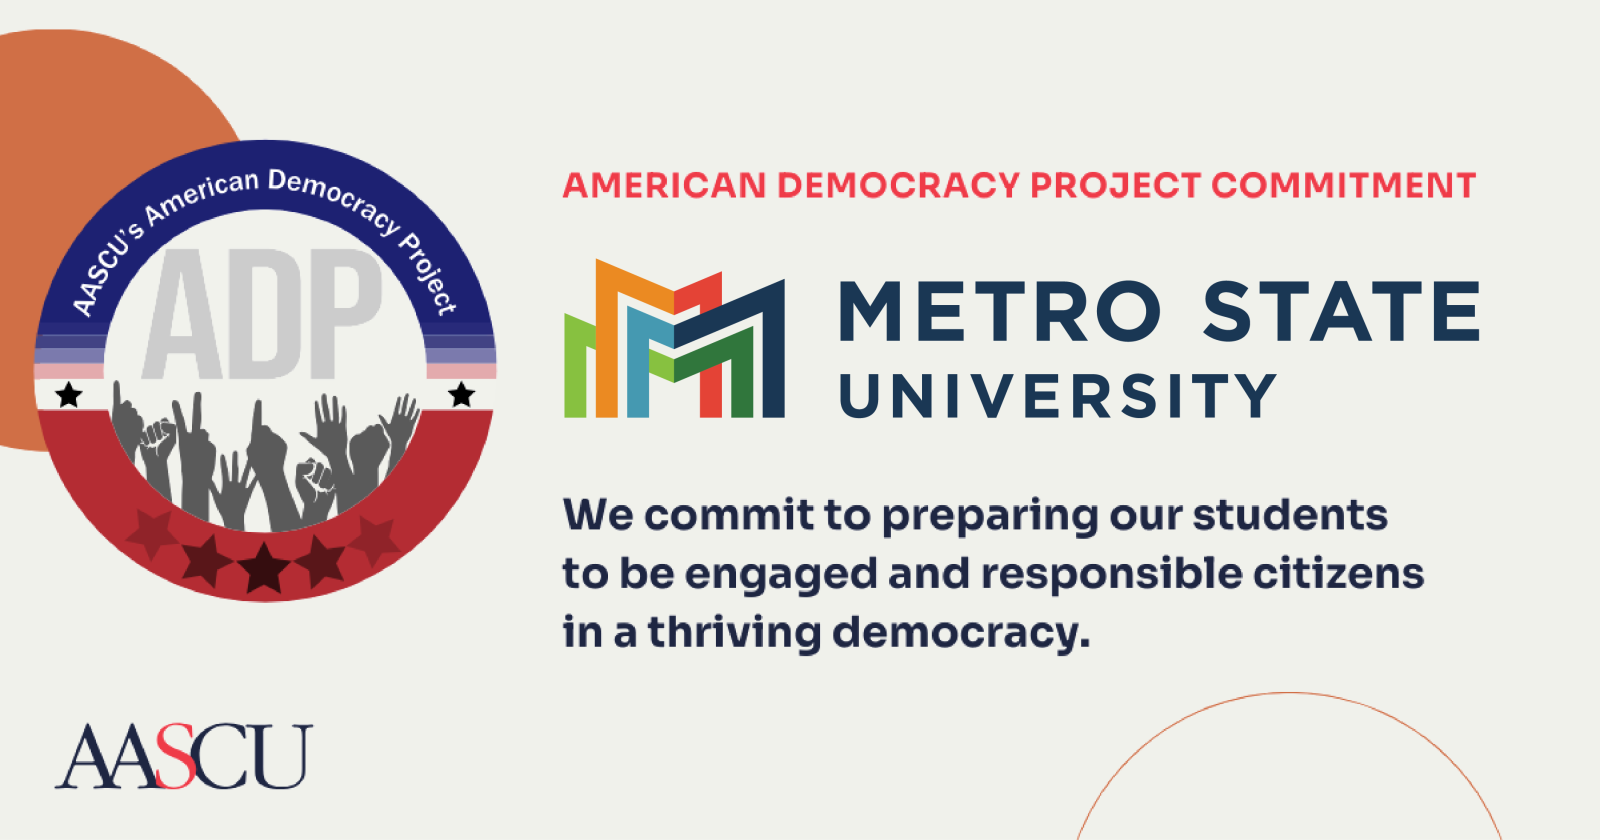 American Democracy Project Commitment: Metro State University commits to preparing students to be engaged and responsible citizens in a thriving democracy